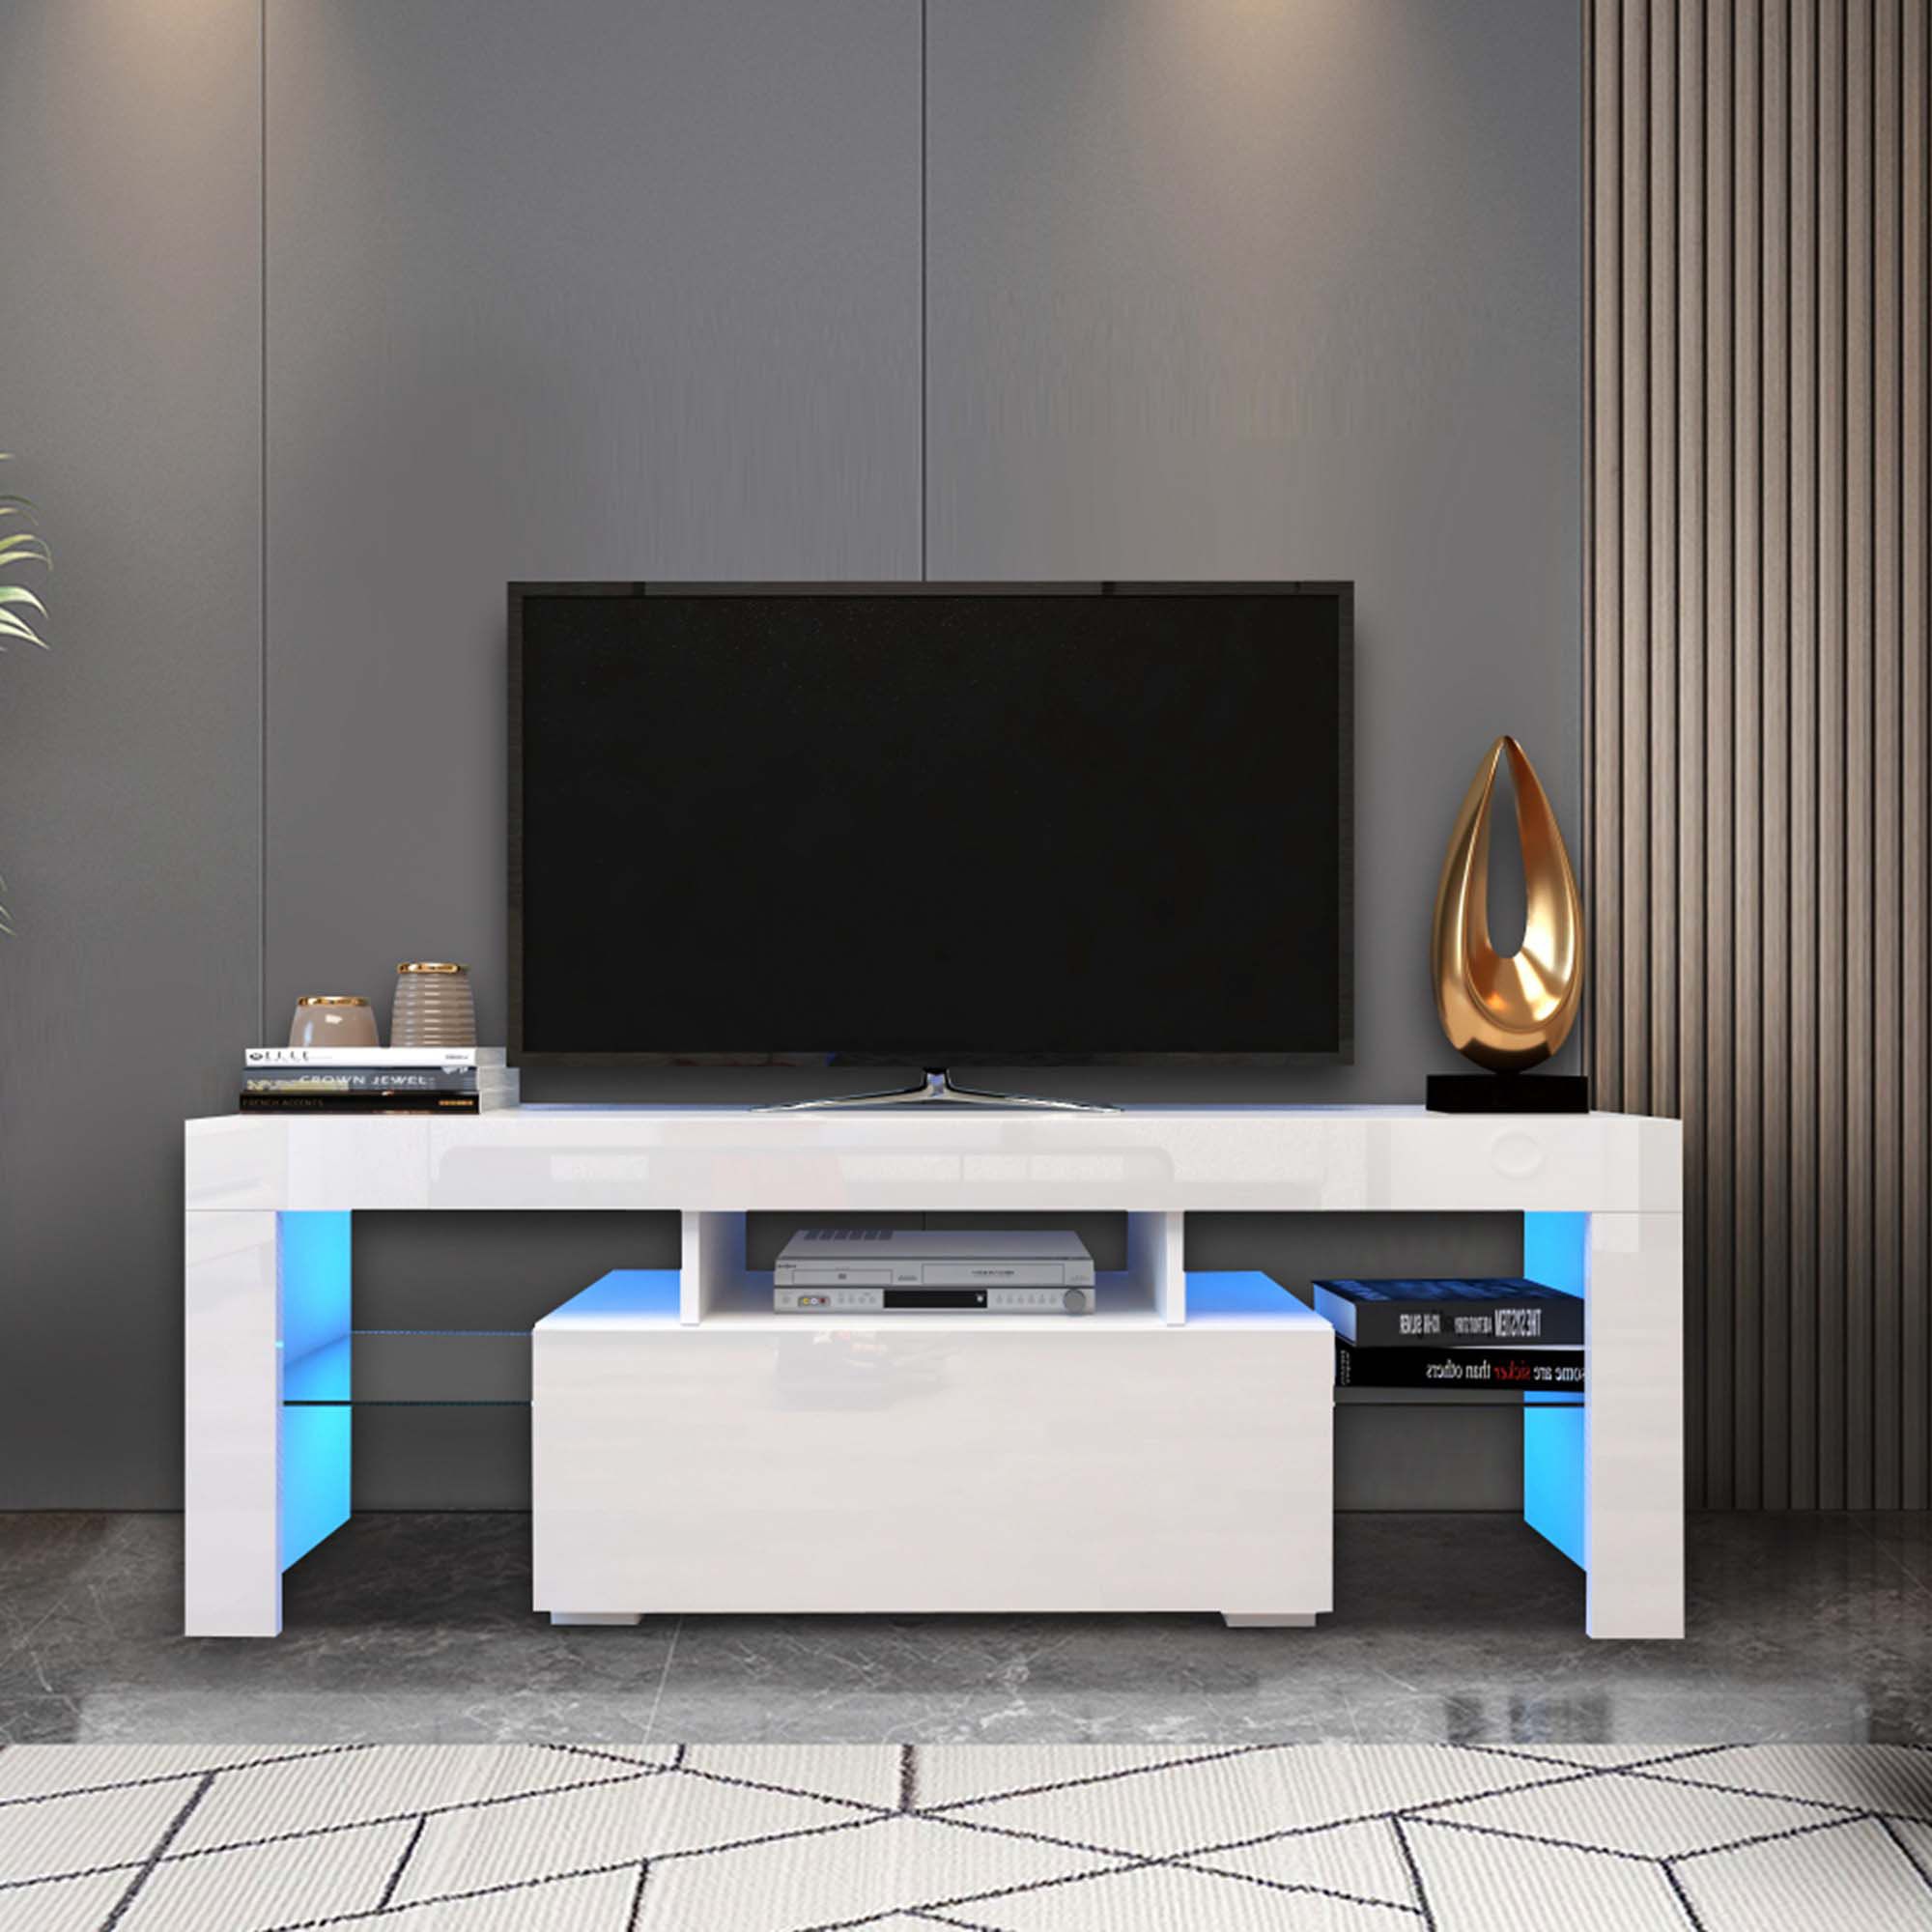 Ivy Bronx Daneca Tv Stand With Led Rgb Lights, Flat Screen Tv Cabinet,  Gaming Consoles | Wayfair With Regard To Stand For Flat Screen (View 12 of 15)